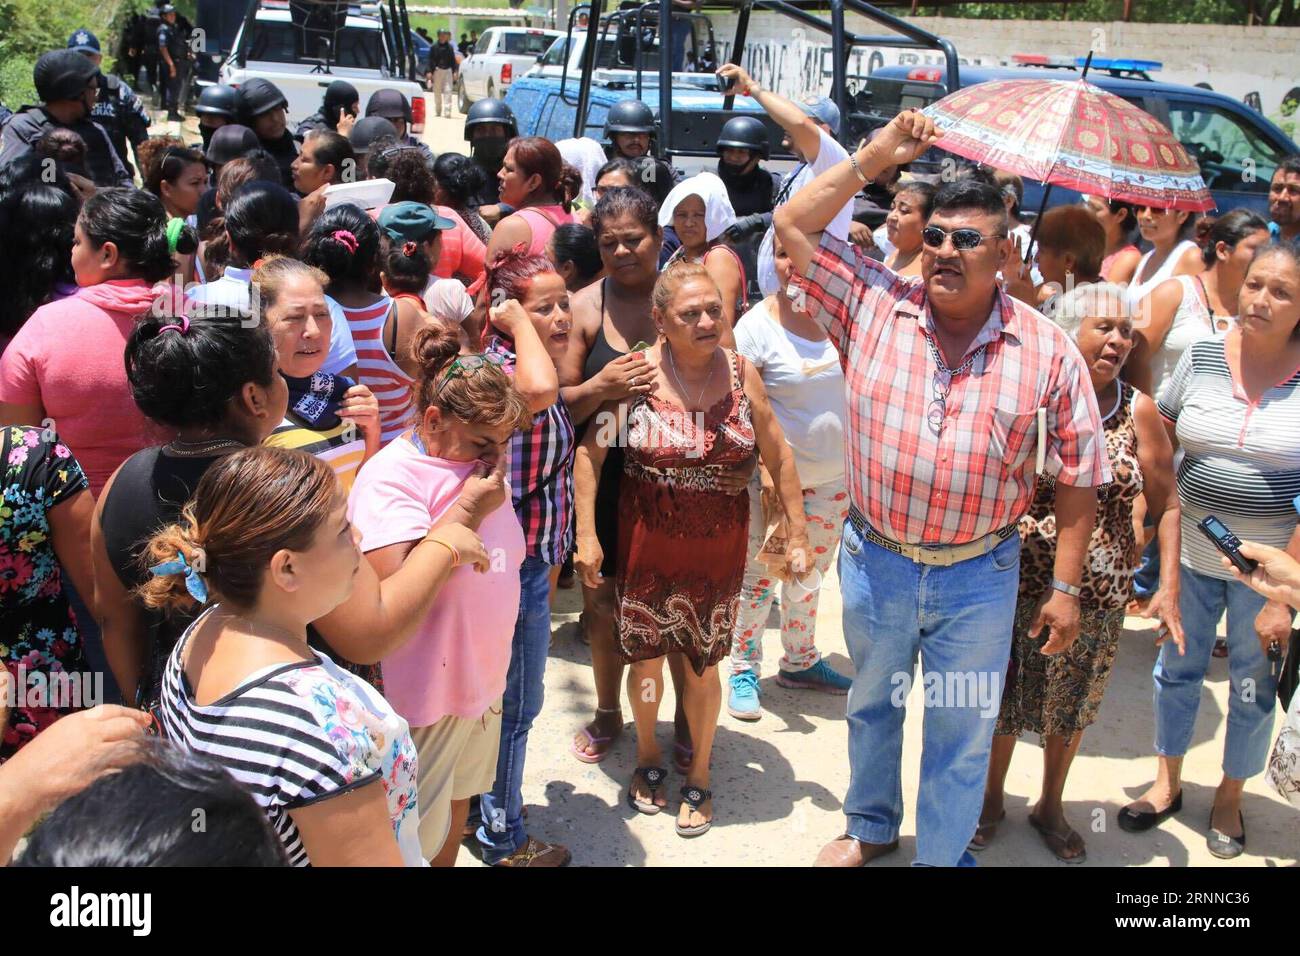 (170707) -- ACAPULCO, July 7, 2017 -- Relatives of prisoners gather outside the prison after a clash between inmates in Acapulco July 6, 2017. At least 28 people were killed in a prison riot on Thursday between suspected members of rival gangs in a prison in southern Mexican state of Guerrero, according to local authorities. David Guzman) (da) (fnc) (jmmn) MEXICO-ACAPULCO-PRISON RIOT e DAVIDxGUZMAN PUBLICATIONxNOTxINxCHN   Acapulco, Mexico July 7 2017 Relatives of Prisoners gather outside The Prison After a Clash between inmates in Acapulco, Mexico July 6 2017 AT least 28 Celebrities Were KILL Stock Photo